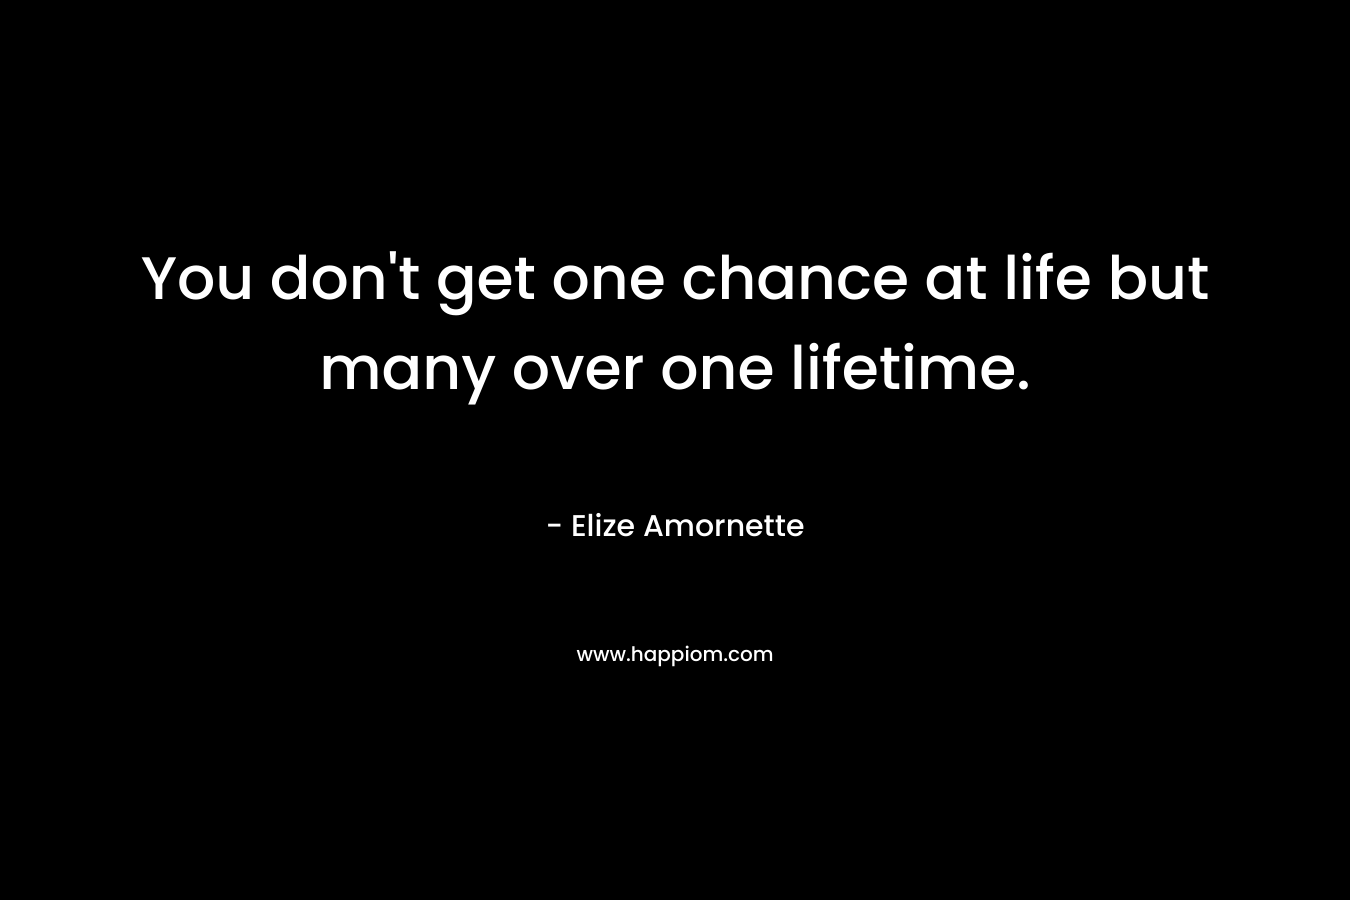 You don’t get one chance at life but many over one lifetime. – Elize Amornette